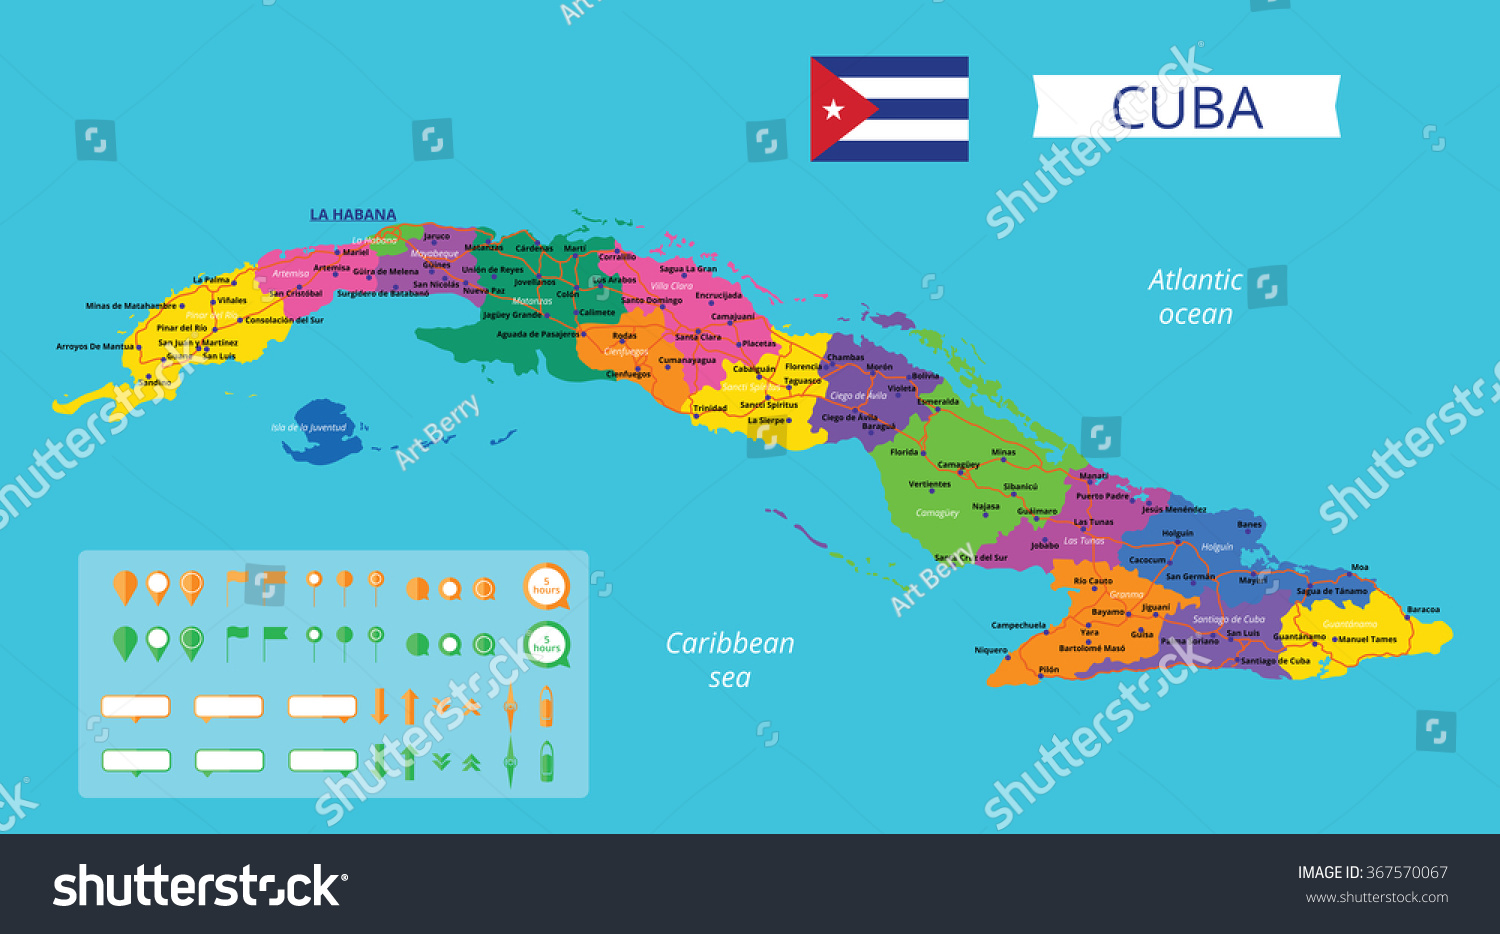 Image result for map of cuba